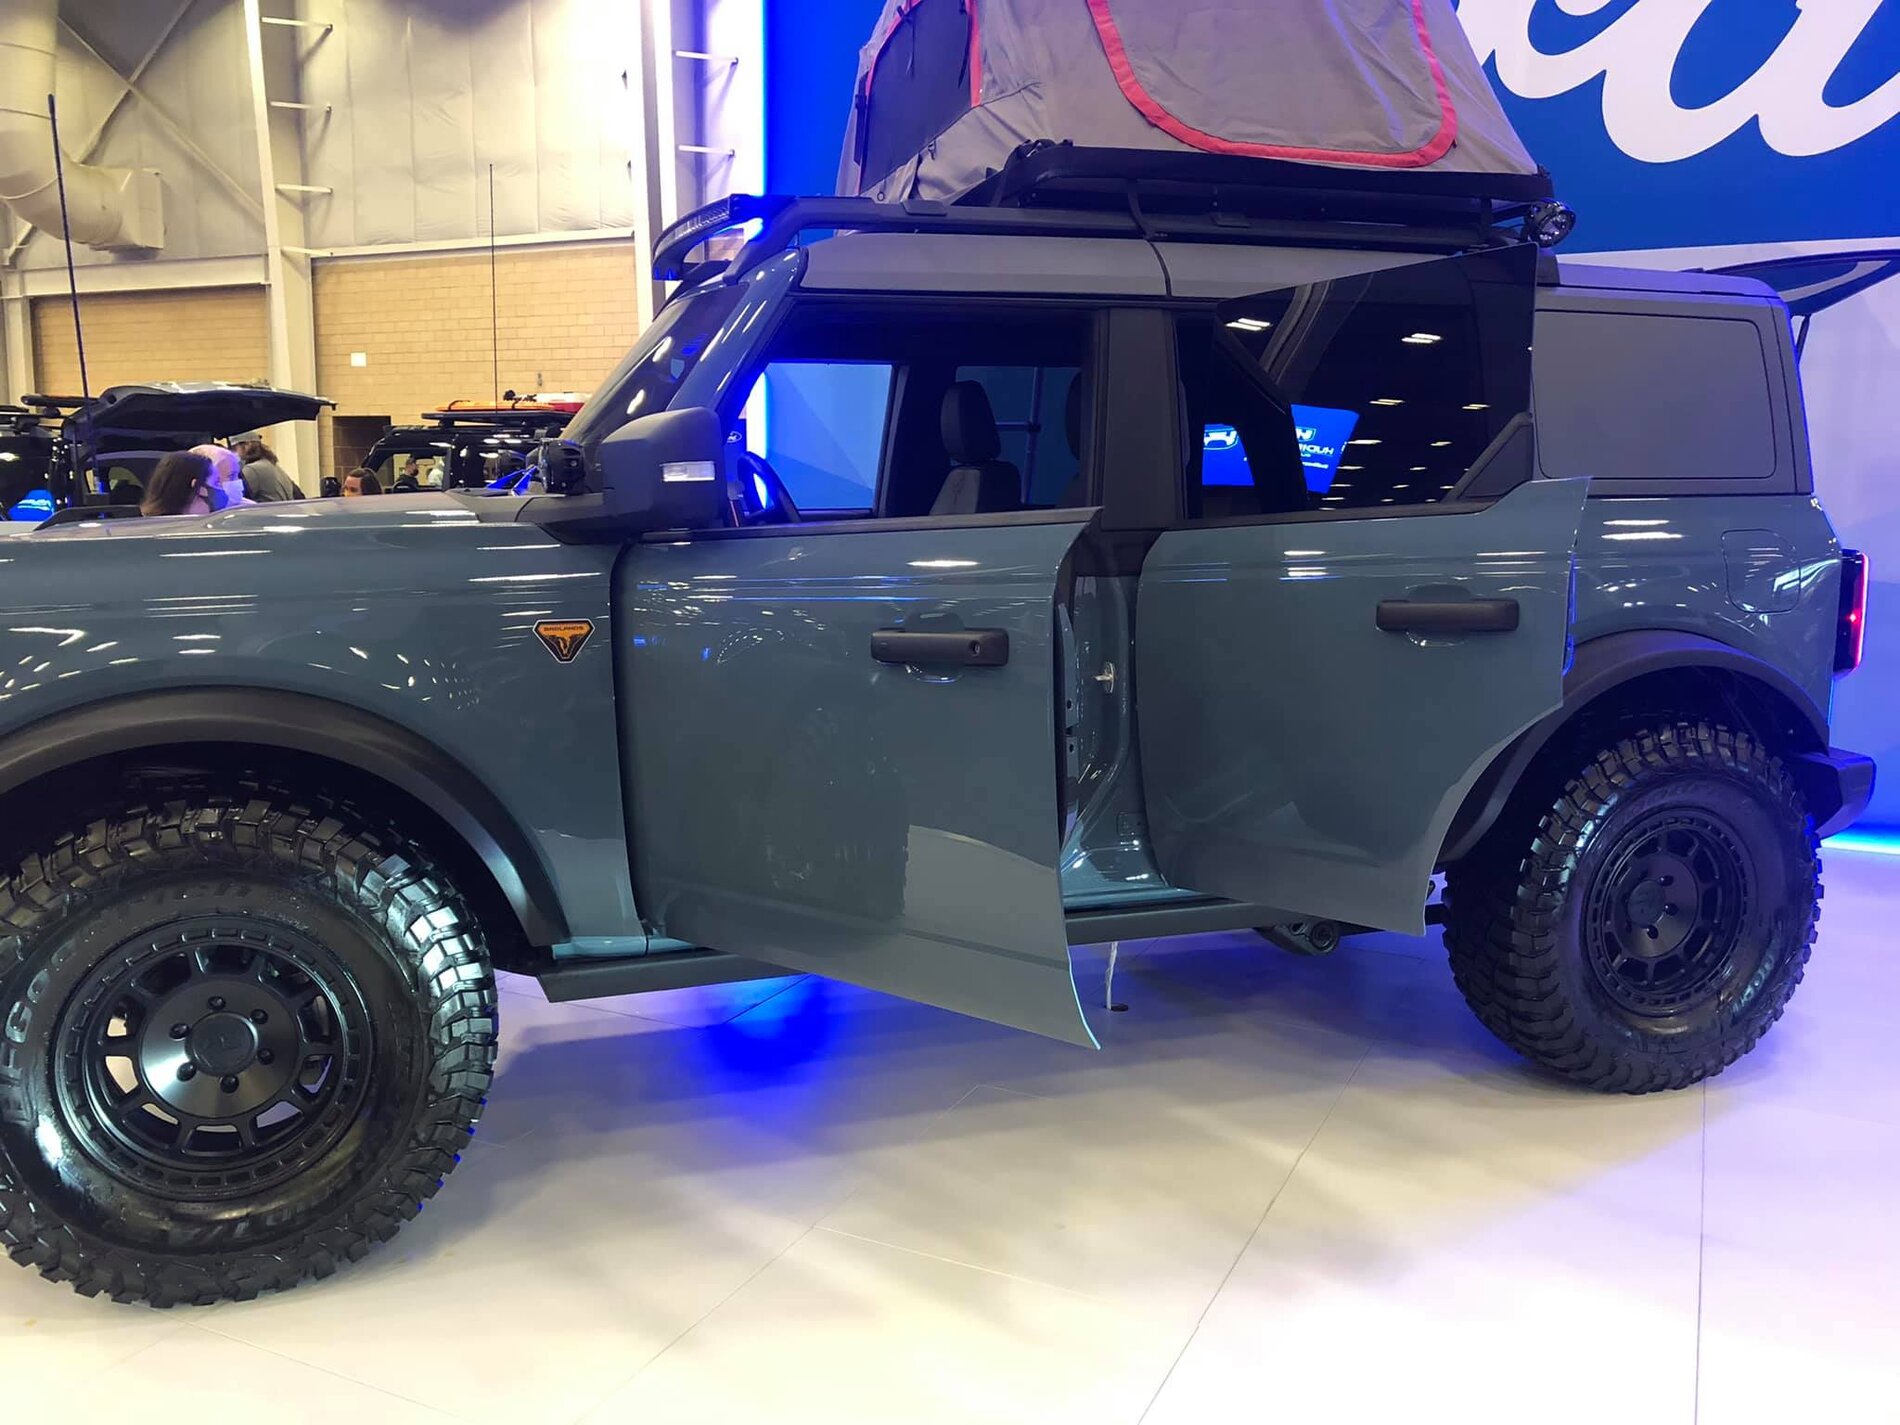 Ford Bronco Pics & Videos From OKC Show: 2-Door Trail Concept and Overland Concept Broncos 157389433_10224037712183326_246328014014112347_o